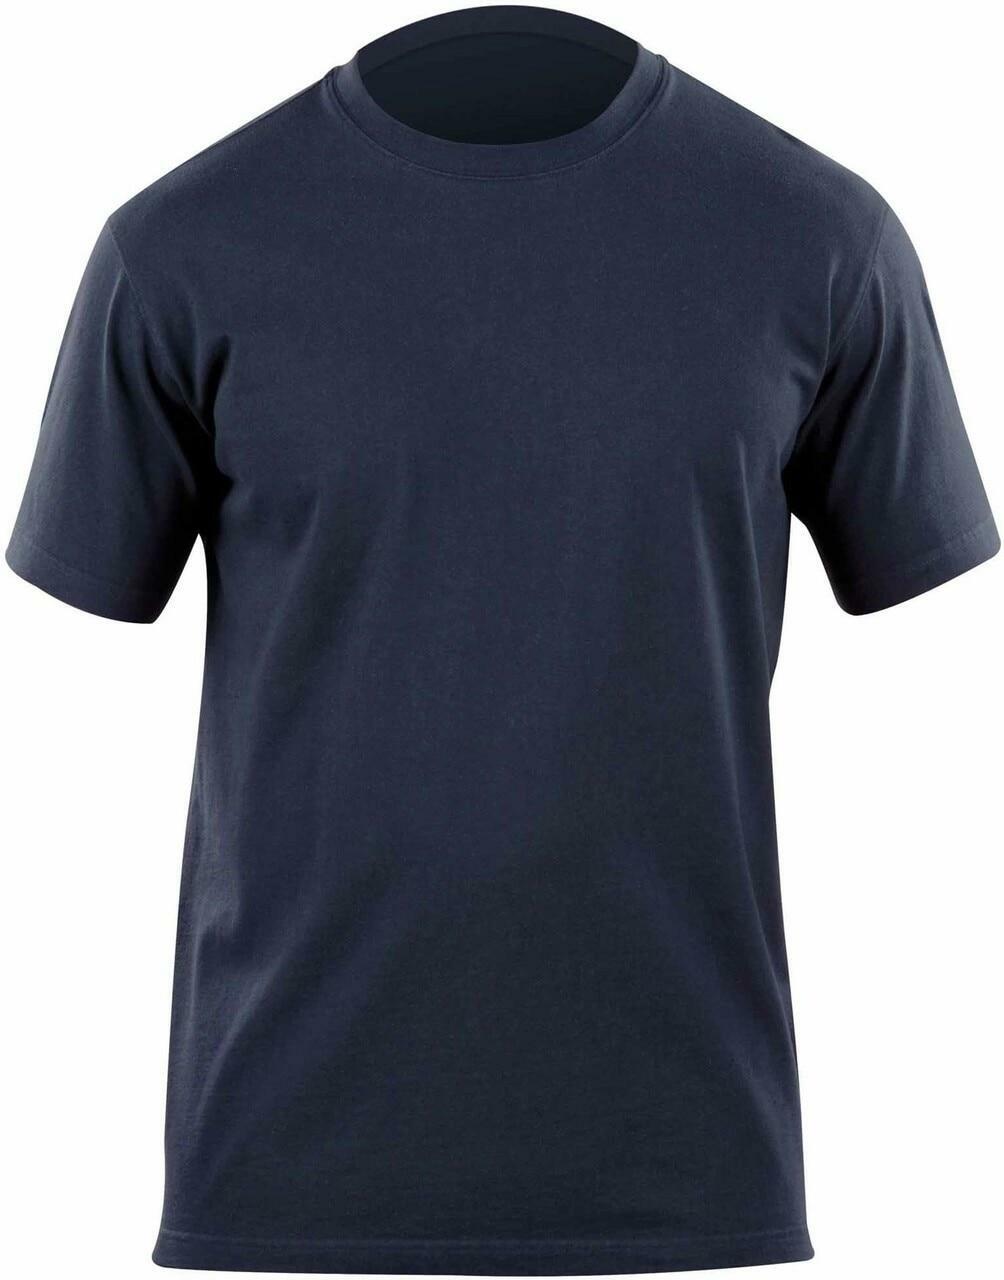 5.11 Professional Short Sleeve T-Shirt (71309)  | Fuego Fire Center | Firefighter Gear | The Professional Short Sleeve Tee is designed to provide a superior fit and professional profile while retaining the easy wearability and comfort of a traditional t-shirt.